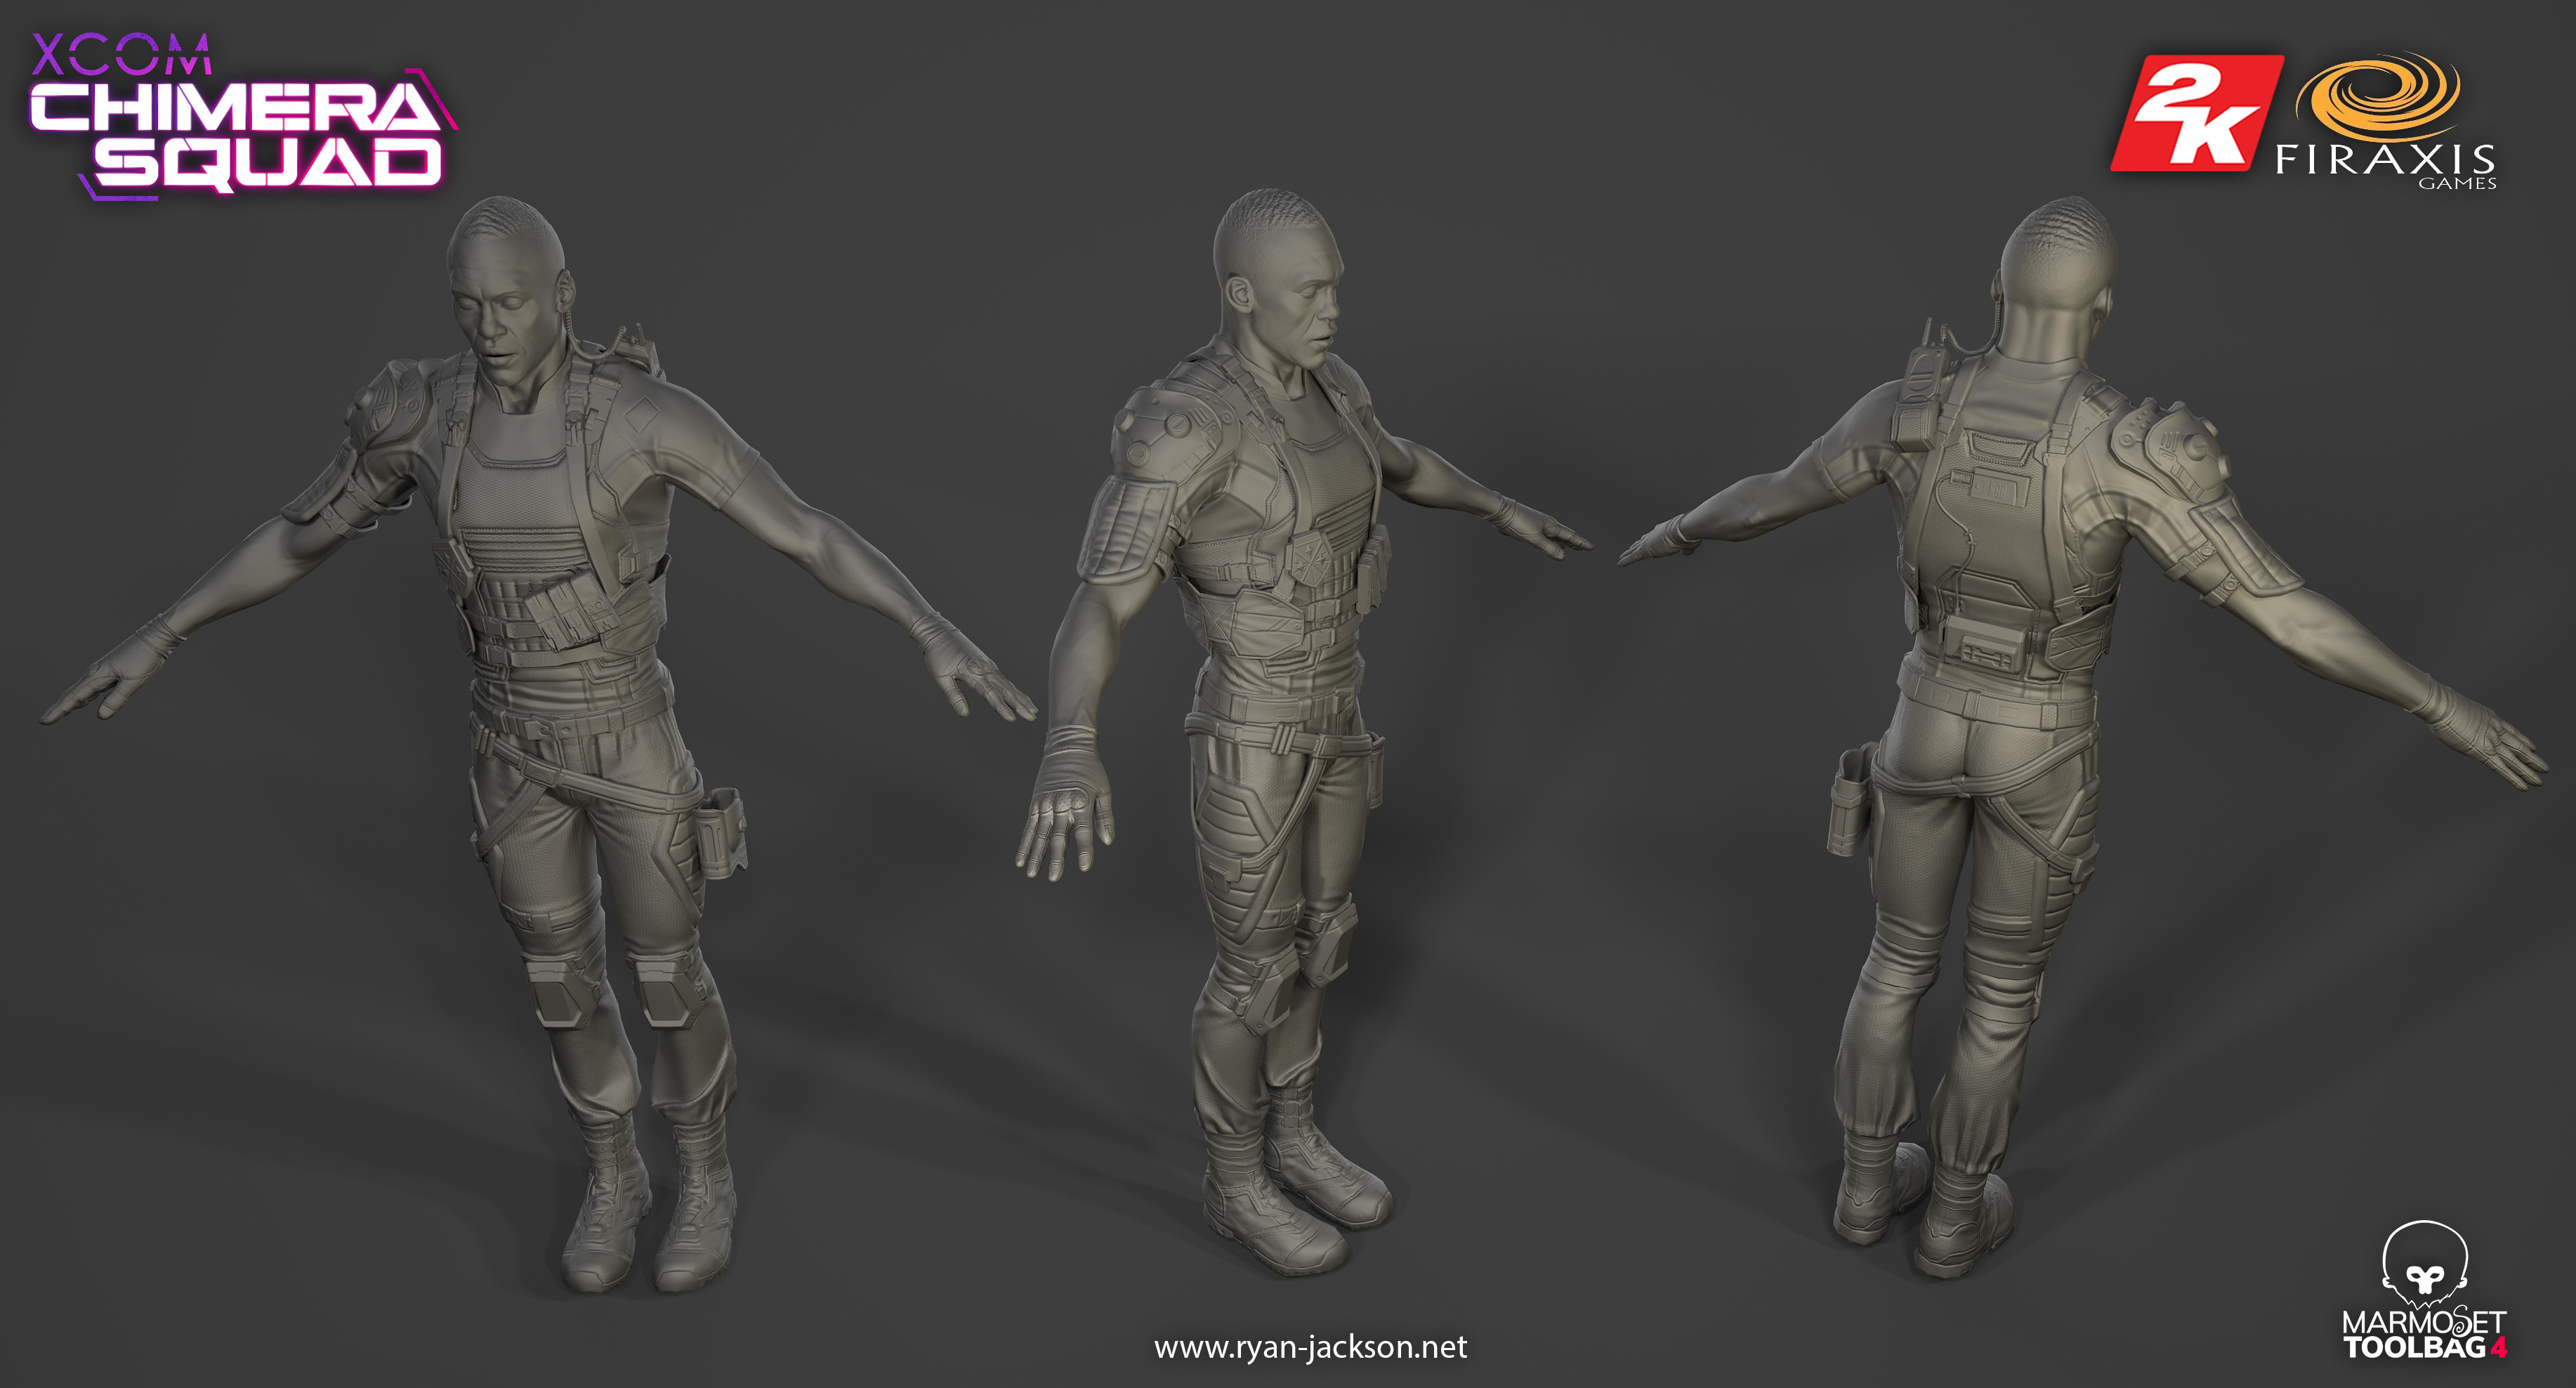 BlueBlood lowpoly, with just the normal map, to show the sculpted surface vs silhouette details at work.